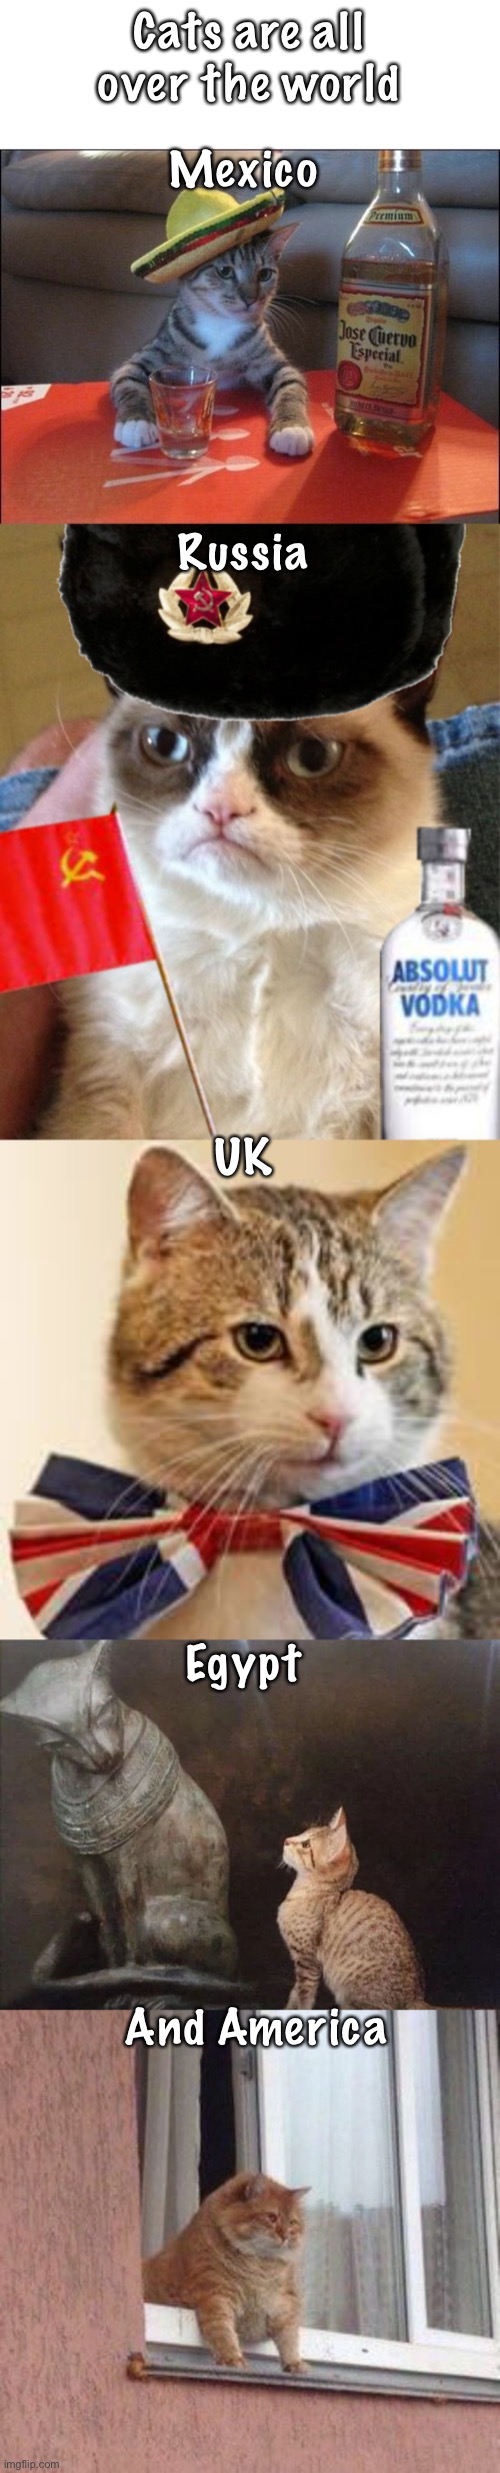 Cats of the Worlds | Cats are all over the world; Mexico; Russia; UK; Egypt; And America | image tagged in tequila cat,soviet grumpy cat,british cat,cat egypt,quarantine cat,memes | made w/ Imgflip meme maker